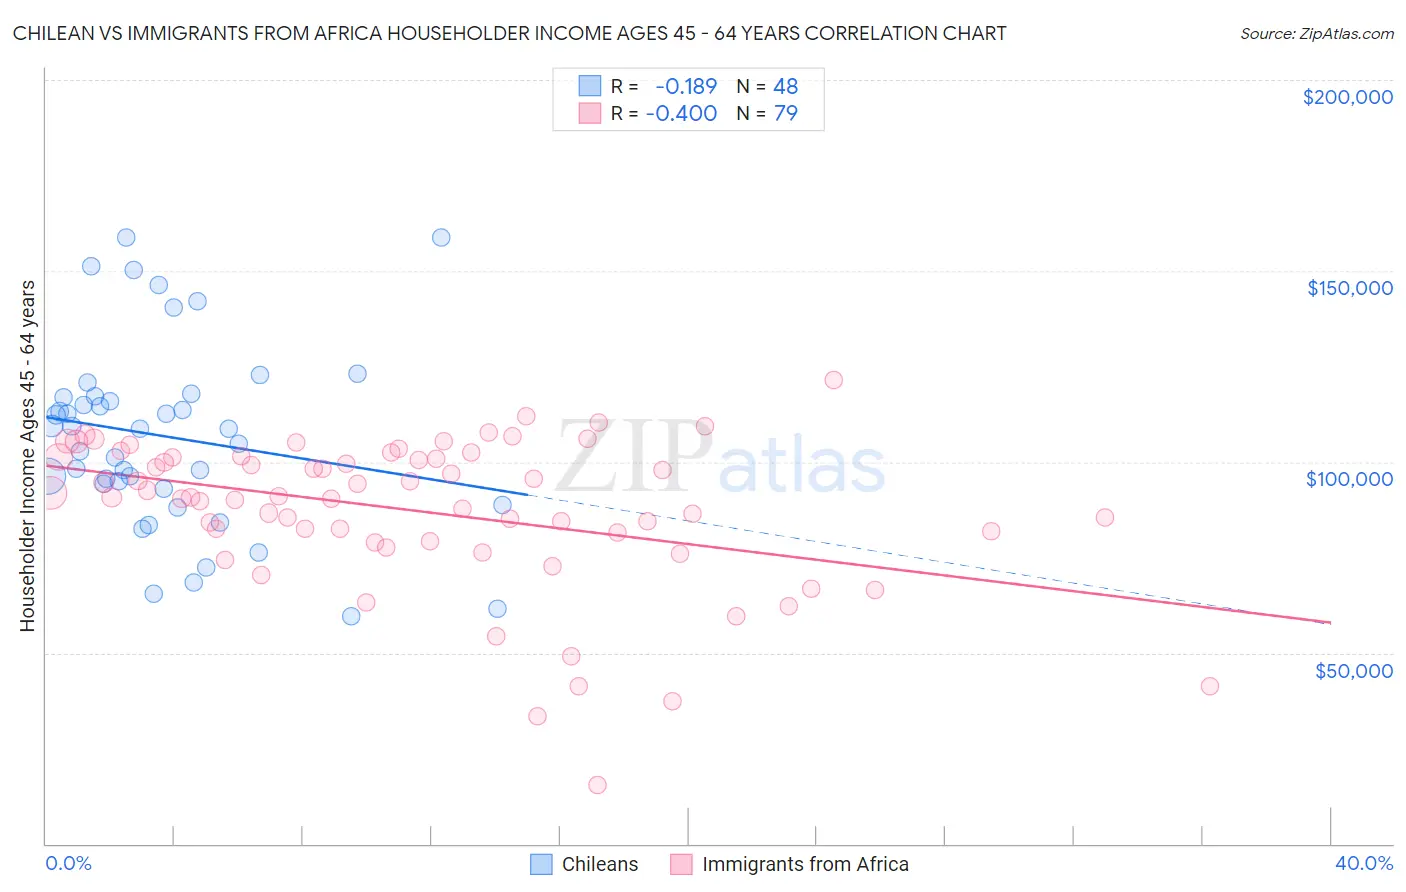 Chilean vs Immigrants from Africa Householder Income Ages 45 - 64 years